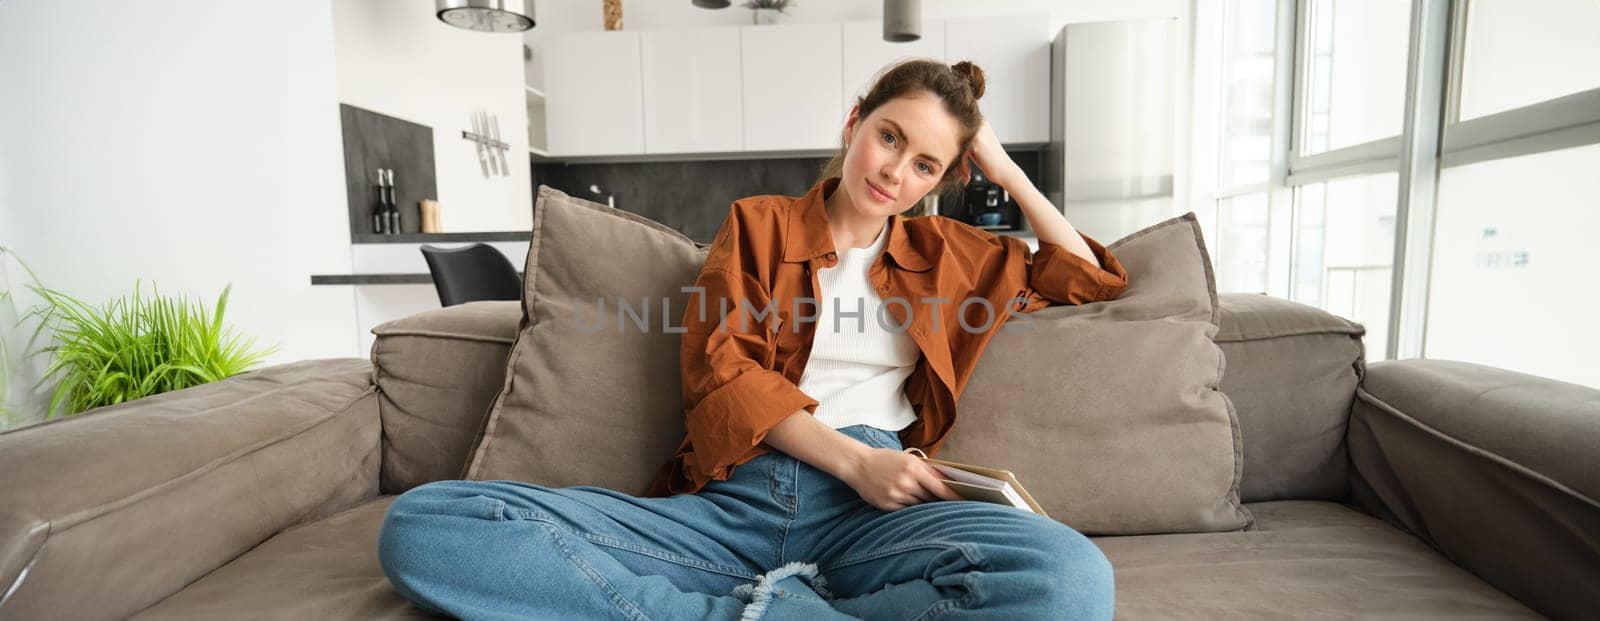 Portrait of young modern woman, female student sitting at home on sofa and looking at camera, posing on couch, smiling.